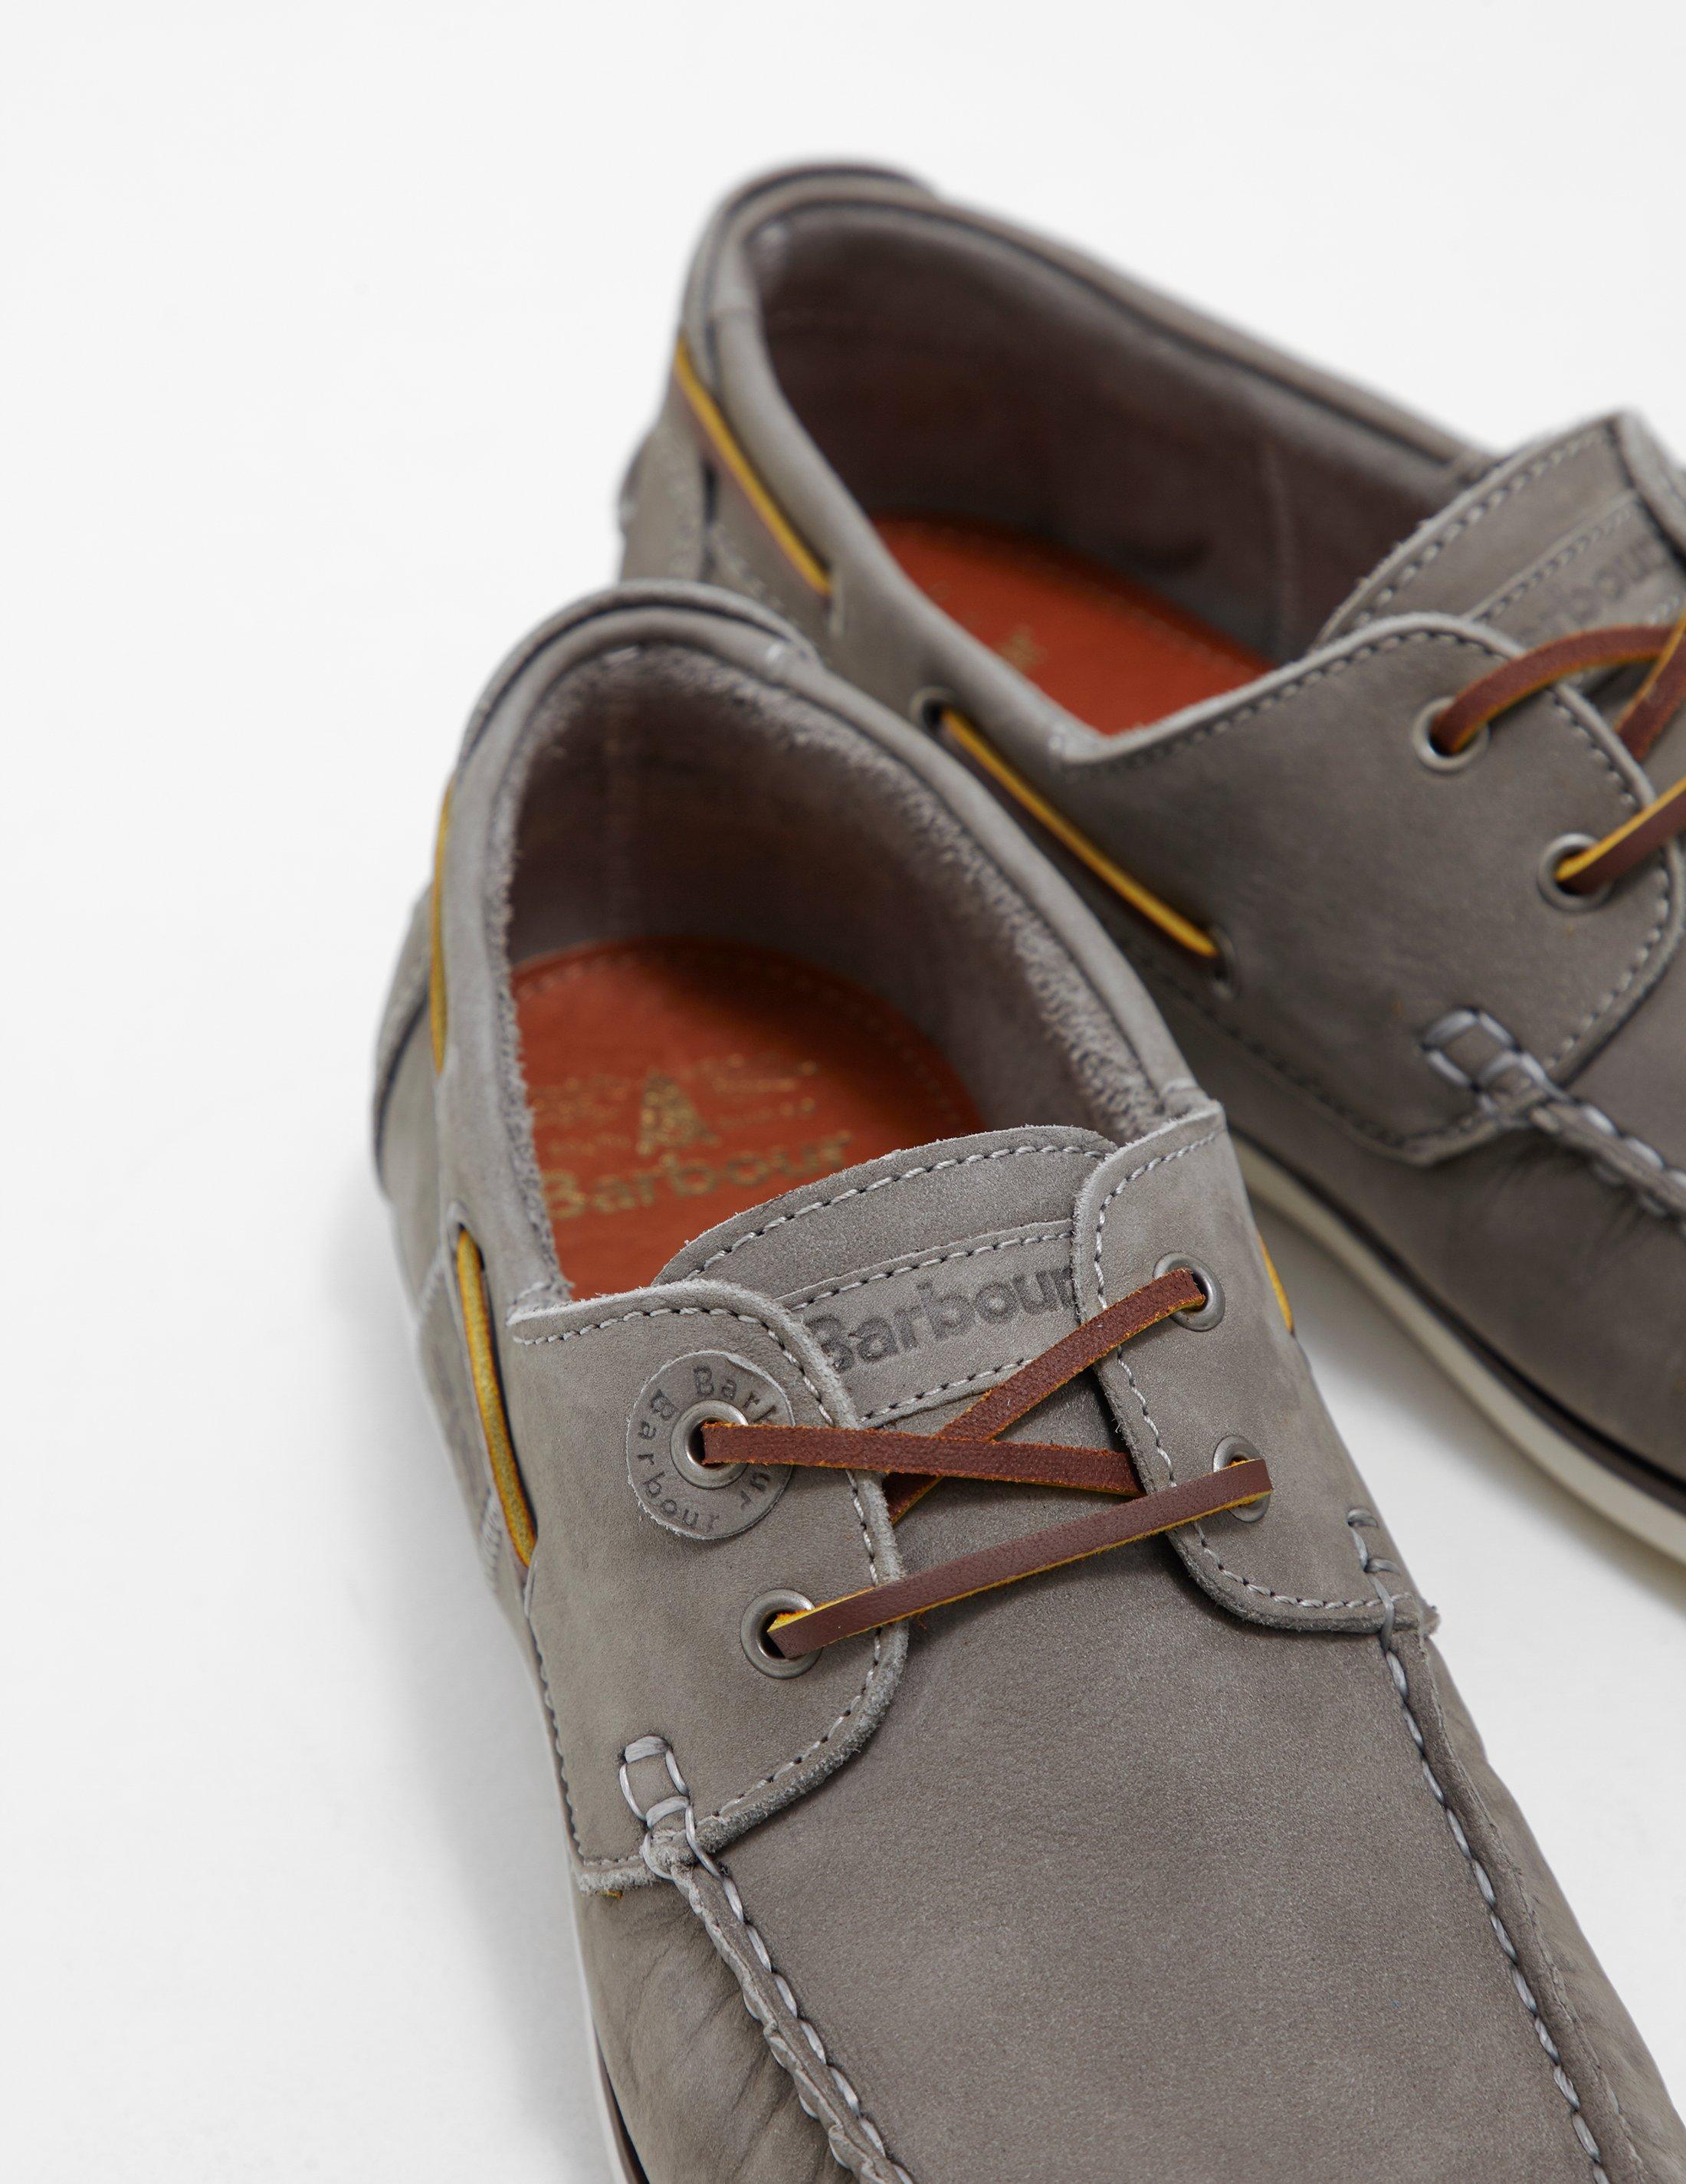 barbour capstan boat shoes grey